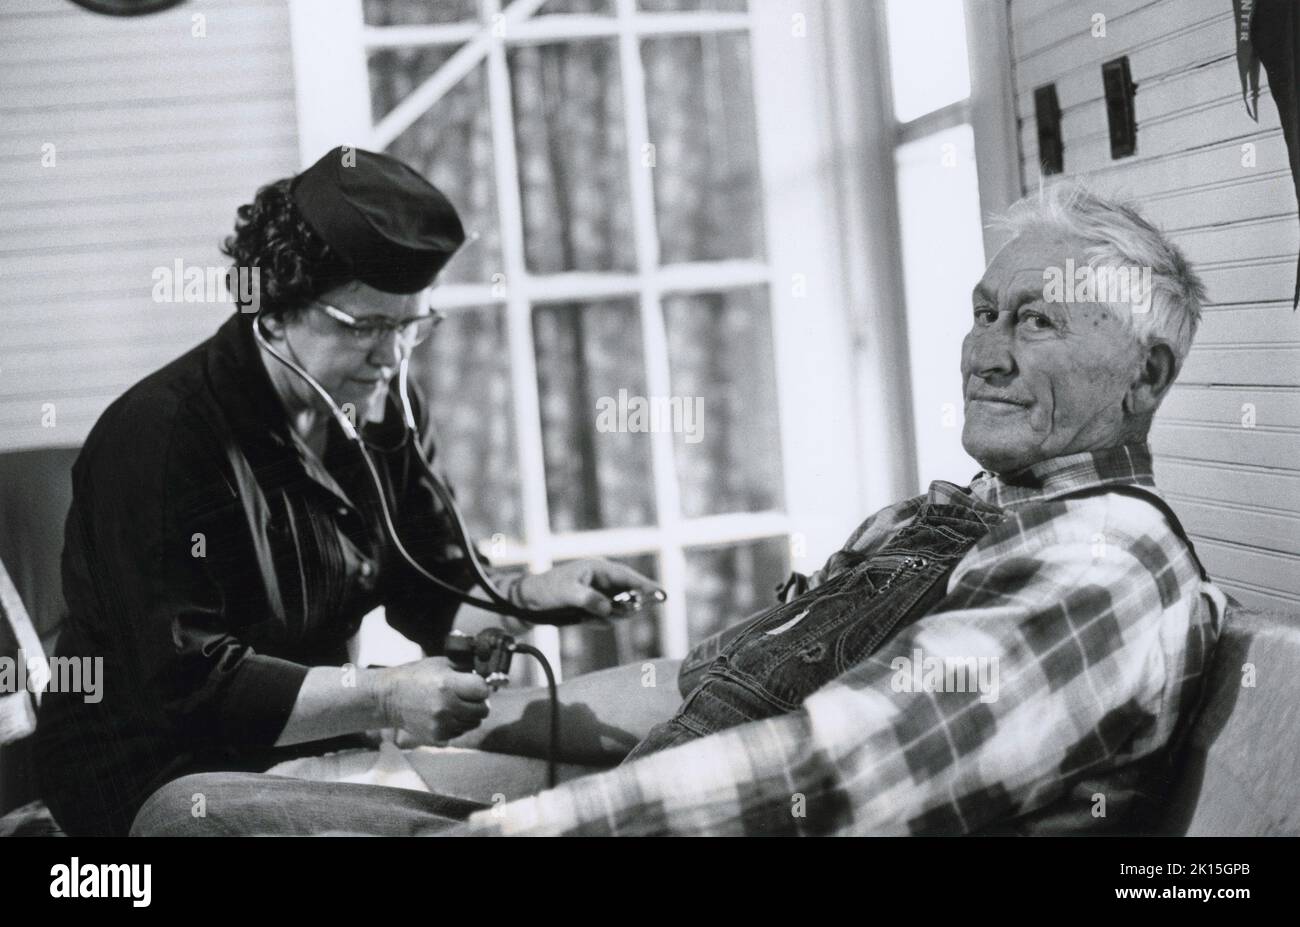 Anna Fox, was the first county heath nurse in the mountains of western North Carolina, bringing medical care to people who had never seen a doctor. Here, she checks a man's blood pressure. Stock Photo